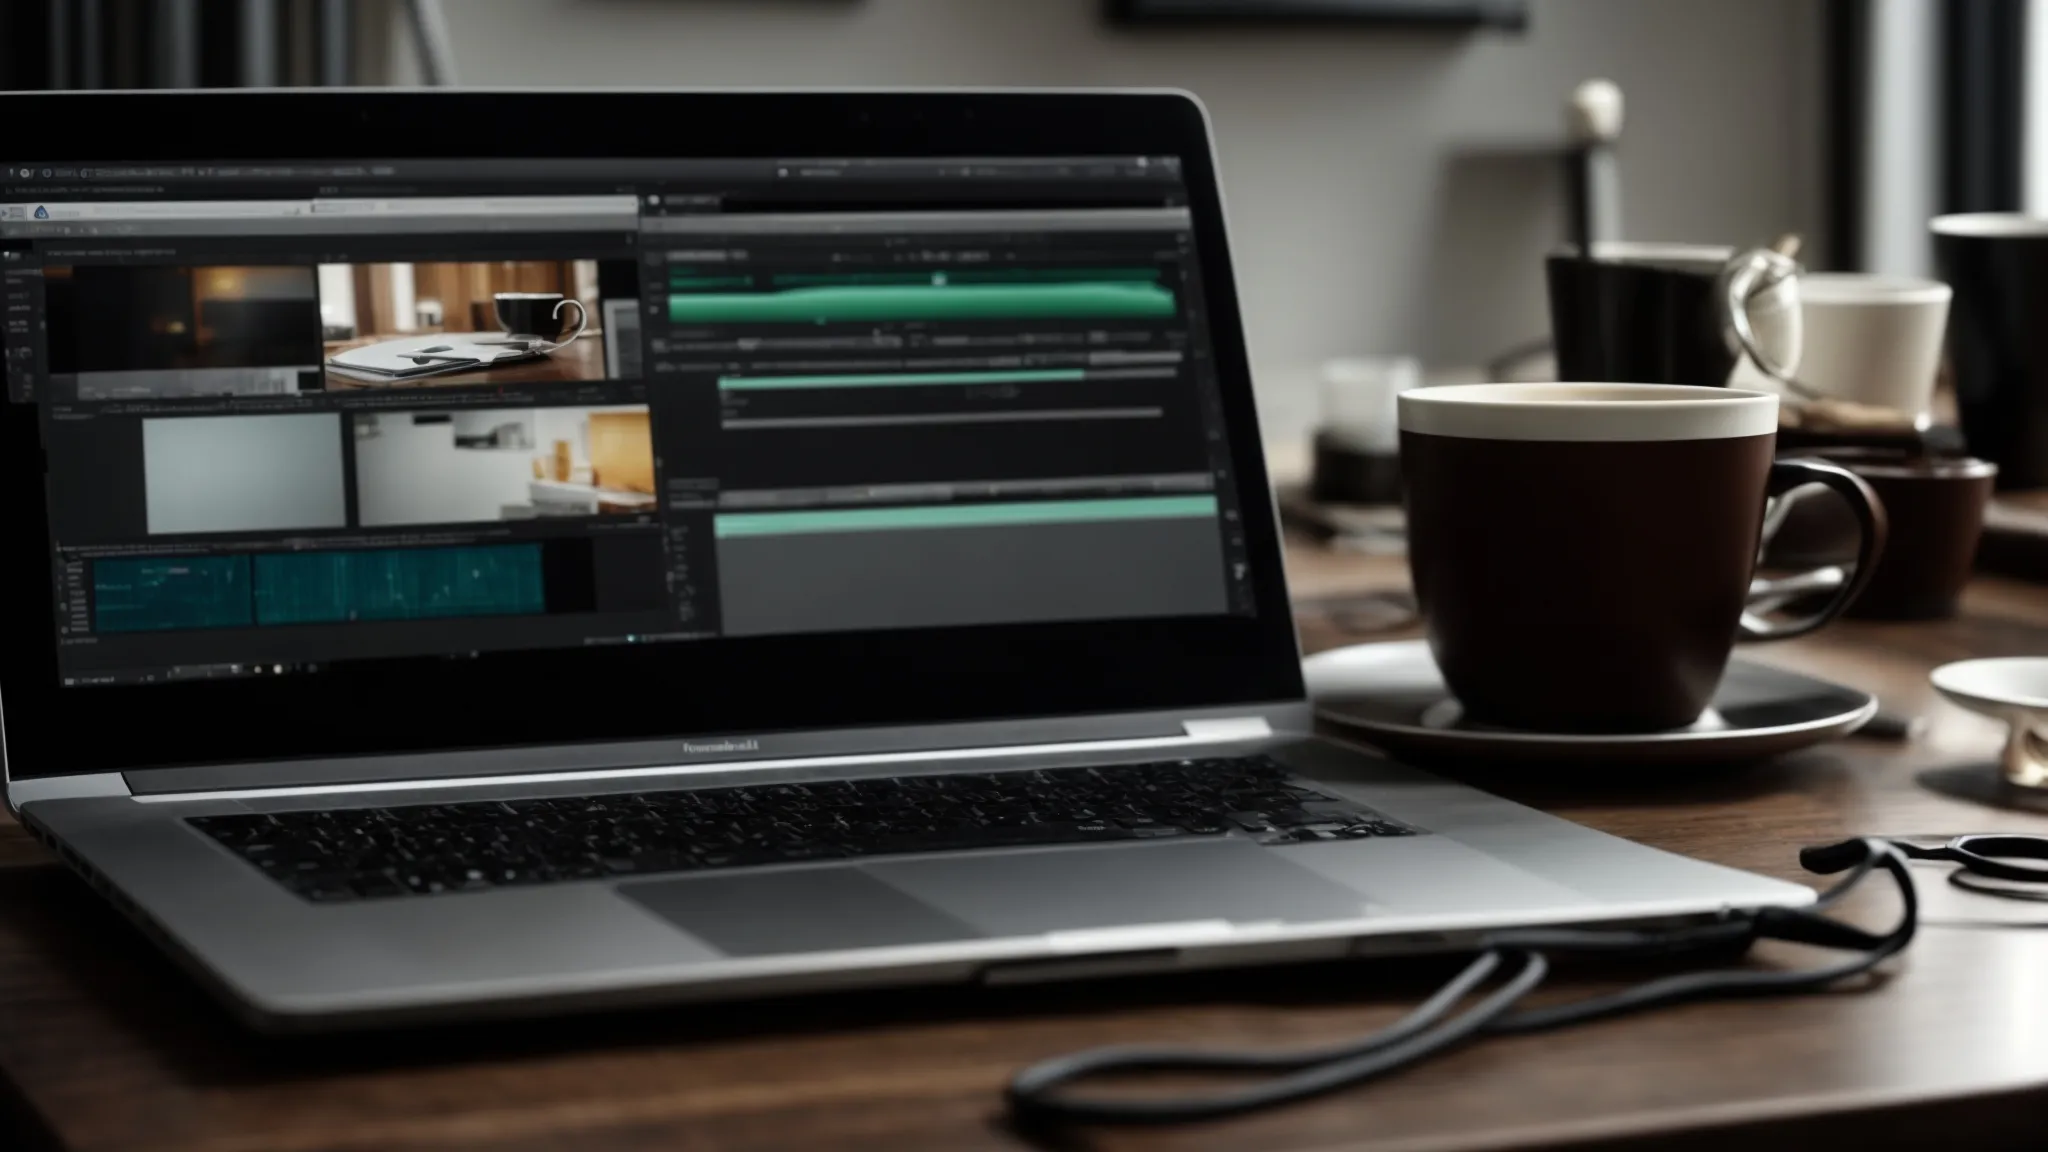 a desktop with an open laptop showing a video editing software interface, surrounded by a smartphone, headphones, and a cup of coffee.